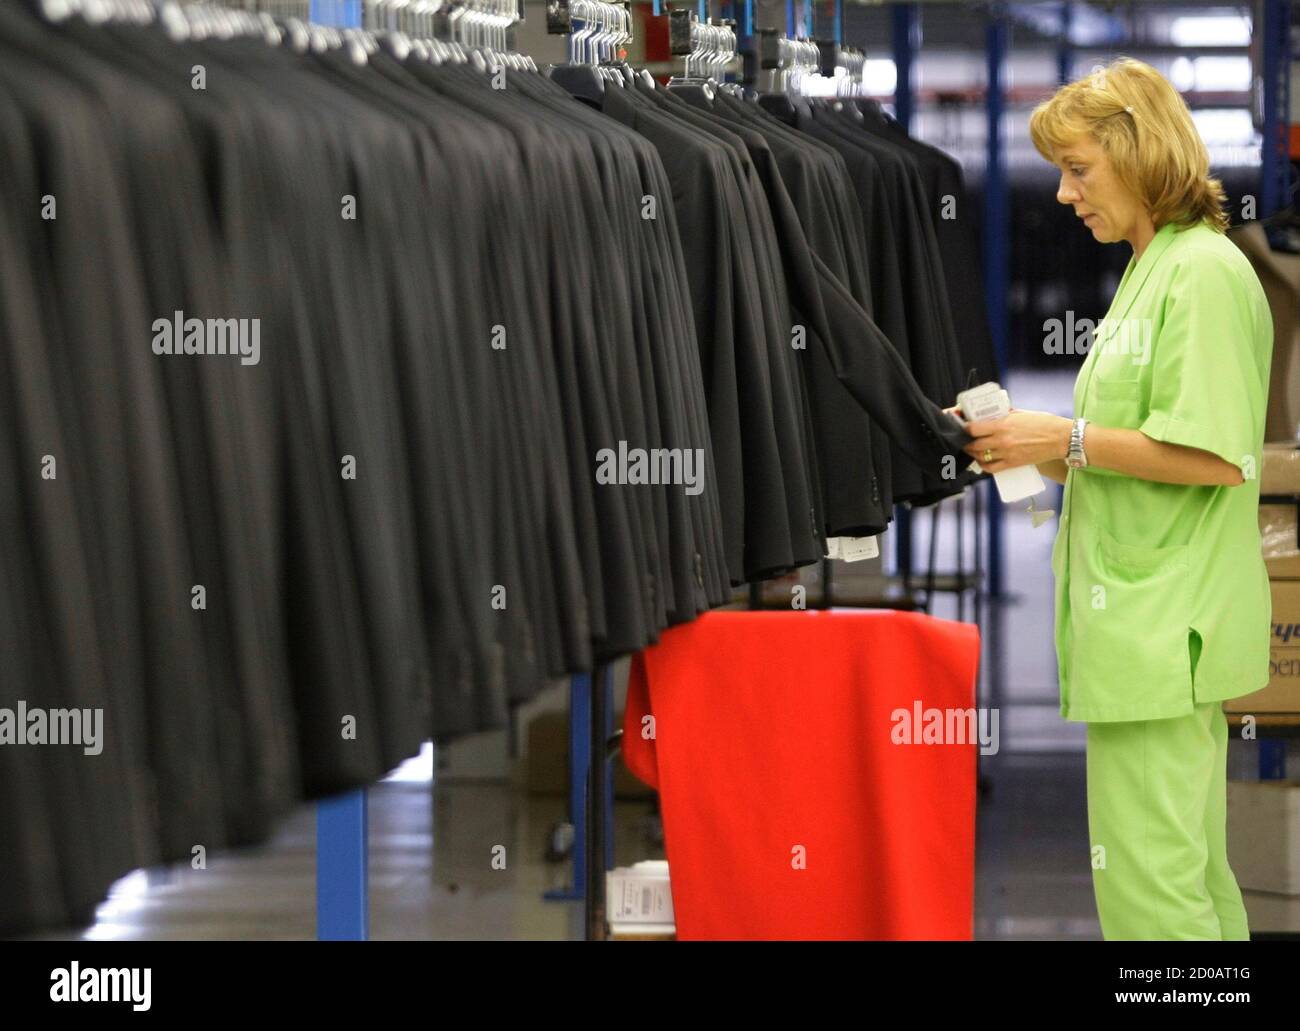 A woman works at the Zara factory at the headquarters of Inditex group in  Arteixo, northern Spain, July 15, 2011. The green, rainy region of Galicia  in northwest Spain is best-known as